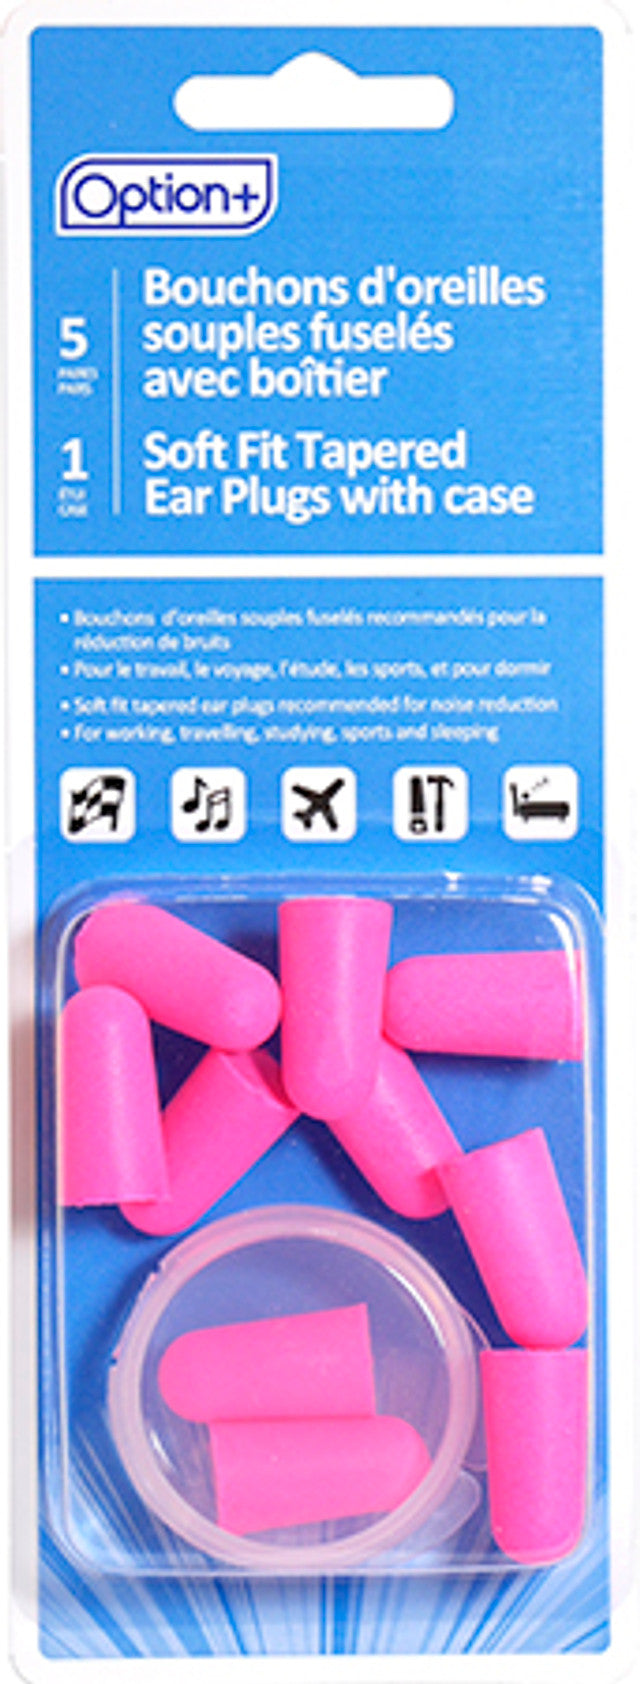 Option+ Soft Fit Tapered Ear Plugs with Case 5 Pairs